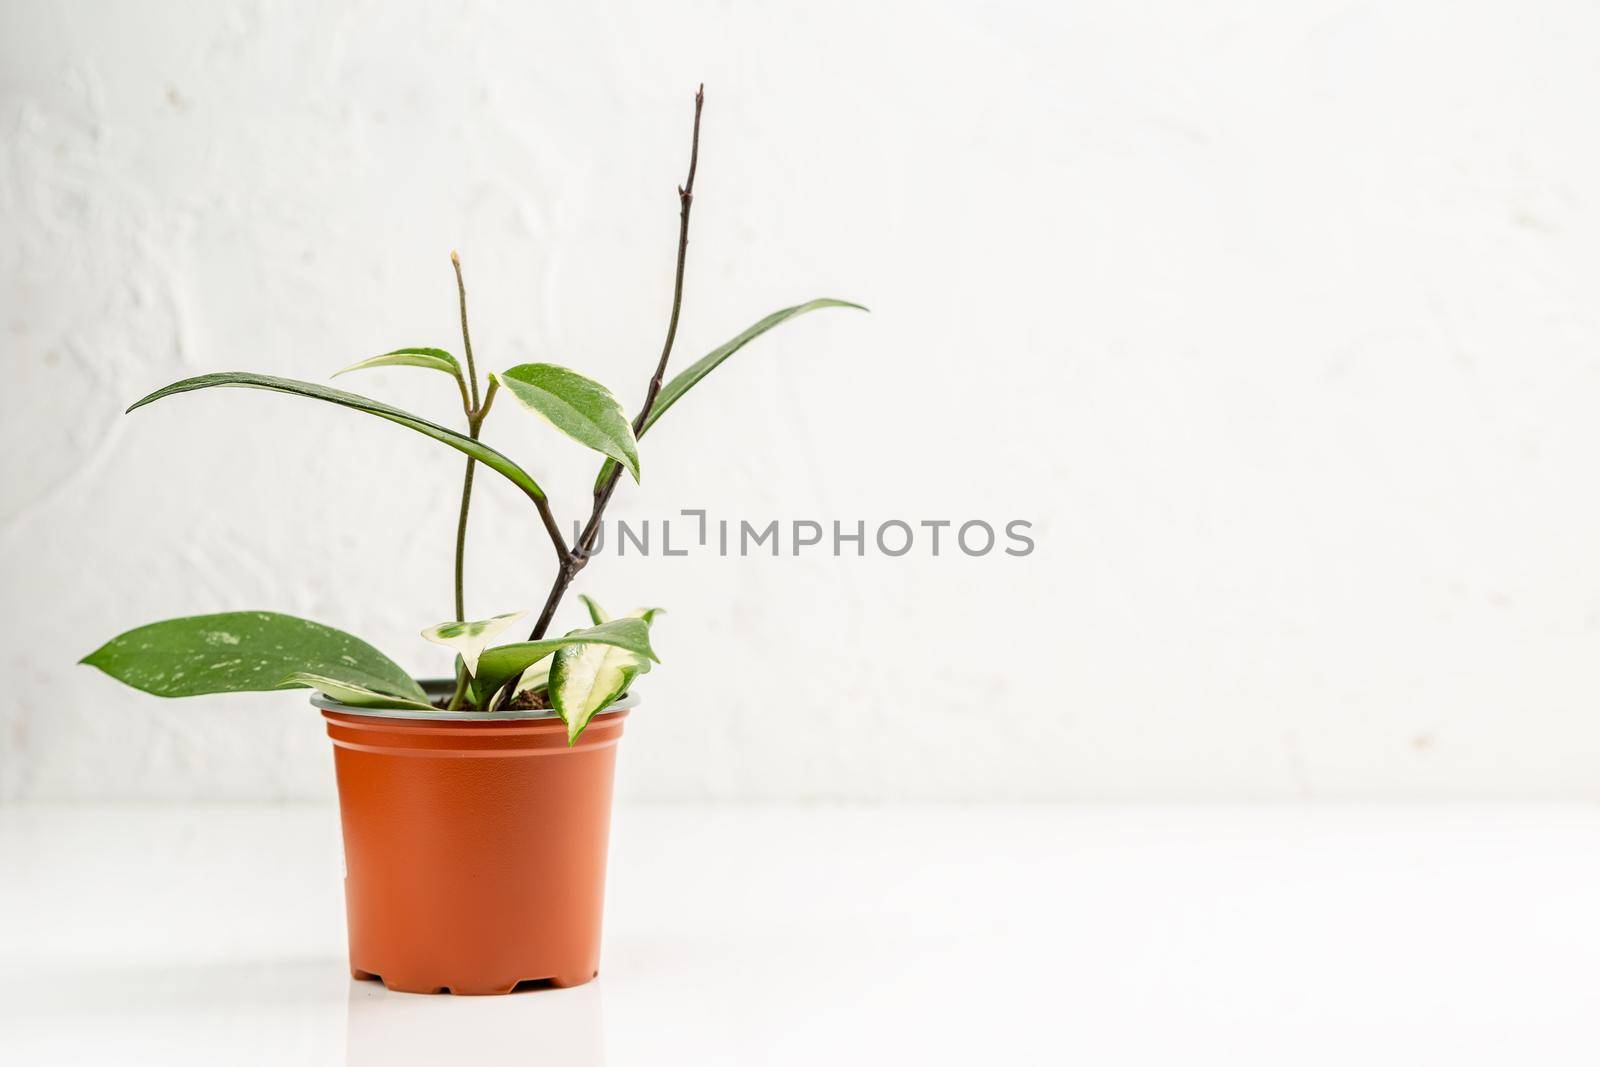 Hoya plant in the nursery pot over white wall, Urban jungle houseplant, copy space for text